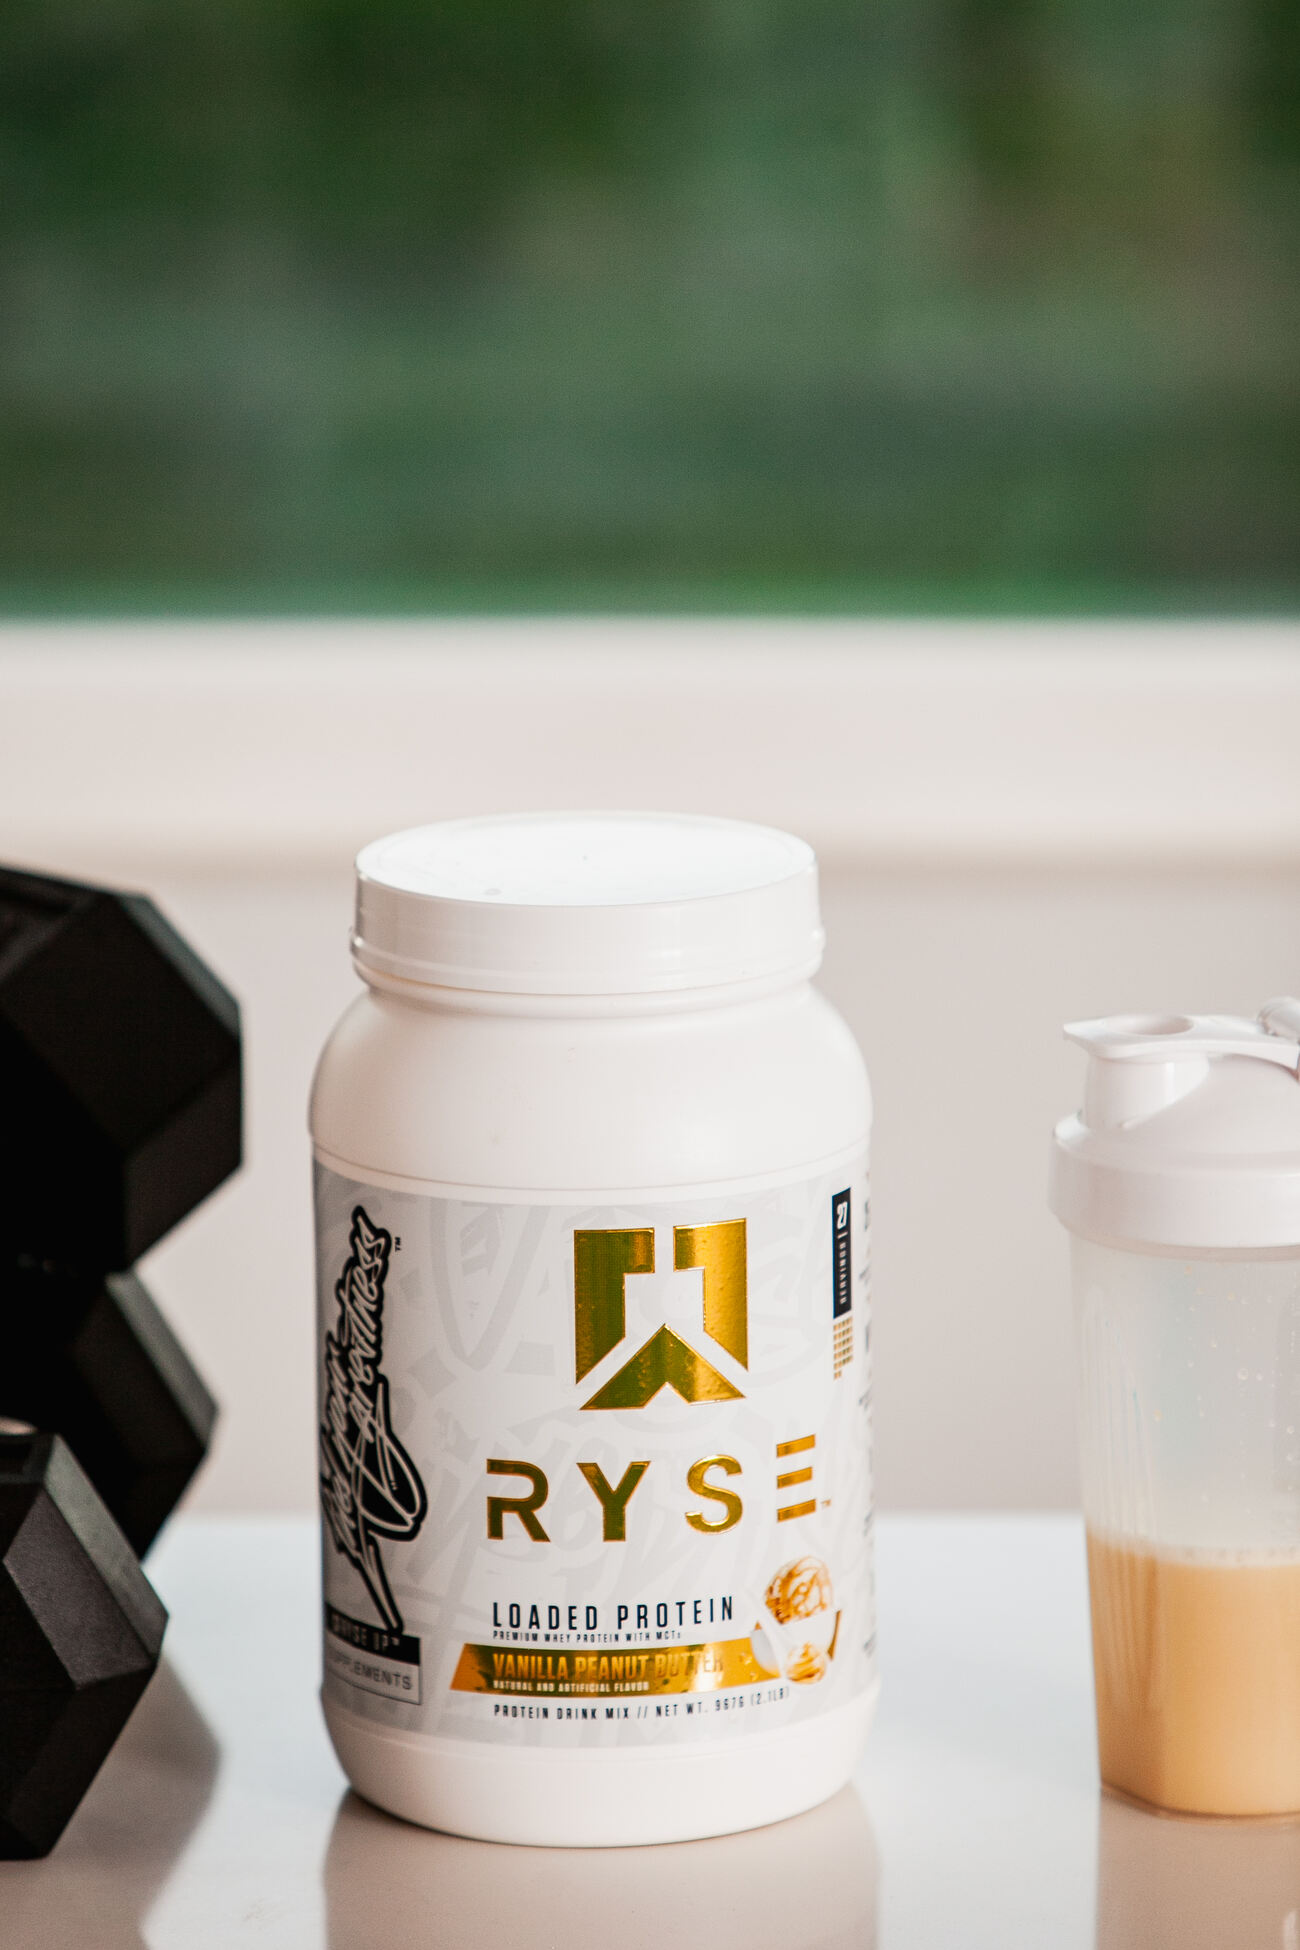 A container of RYSE Loaded Protein in a white bottle with gold and black labeling placed beside a protein shaker on a white surface with a blurred green outdoor background